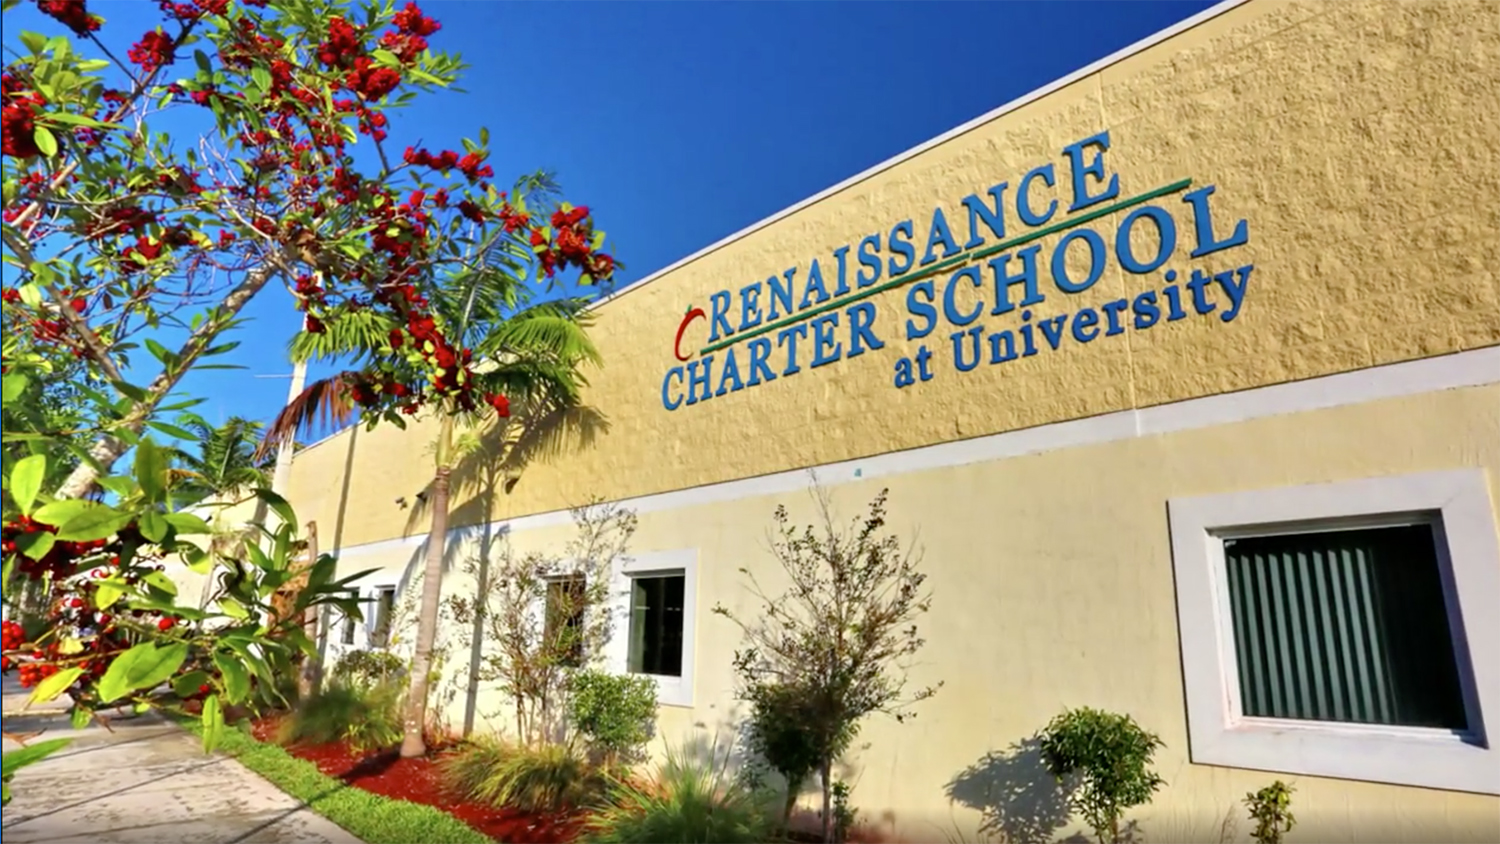 12-Year-Old Arrested After Making Bomb Threat at Tamarac School